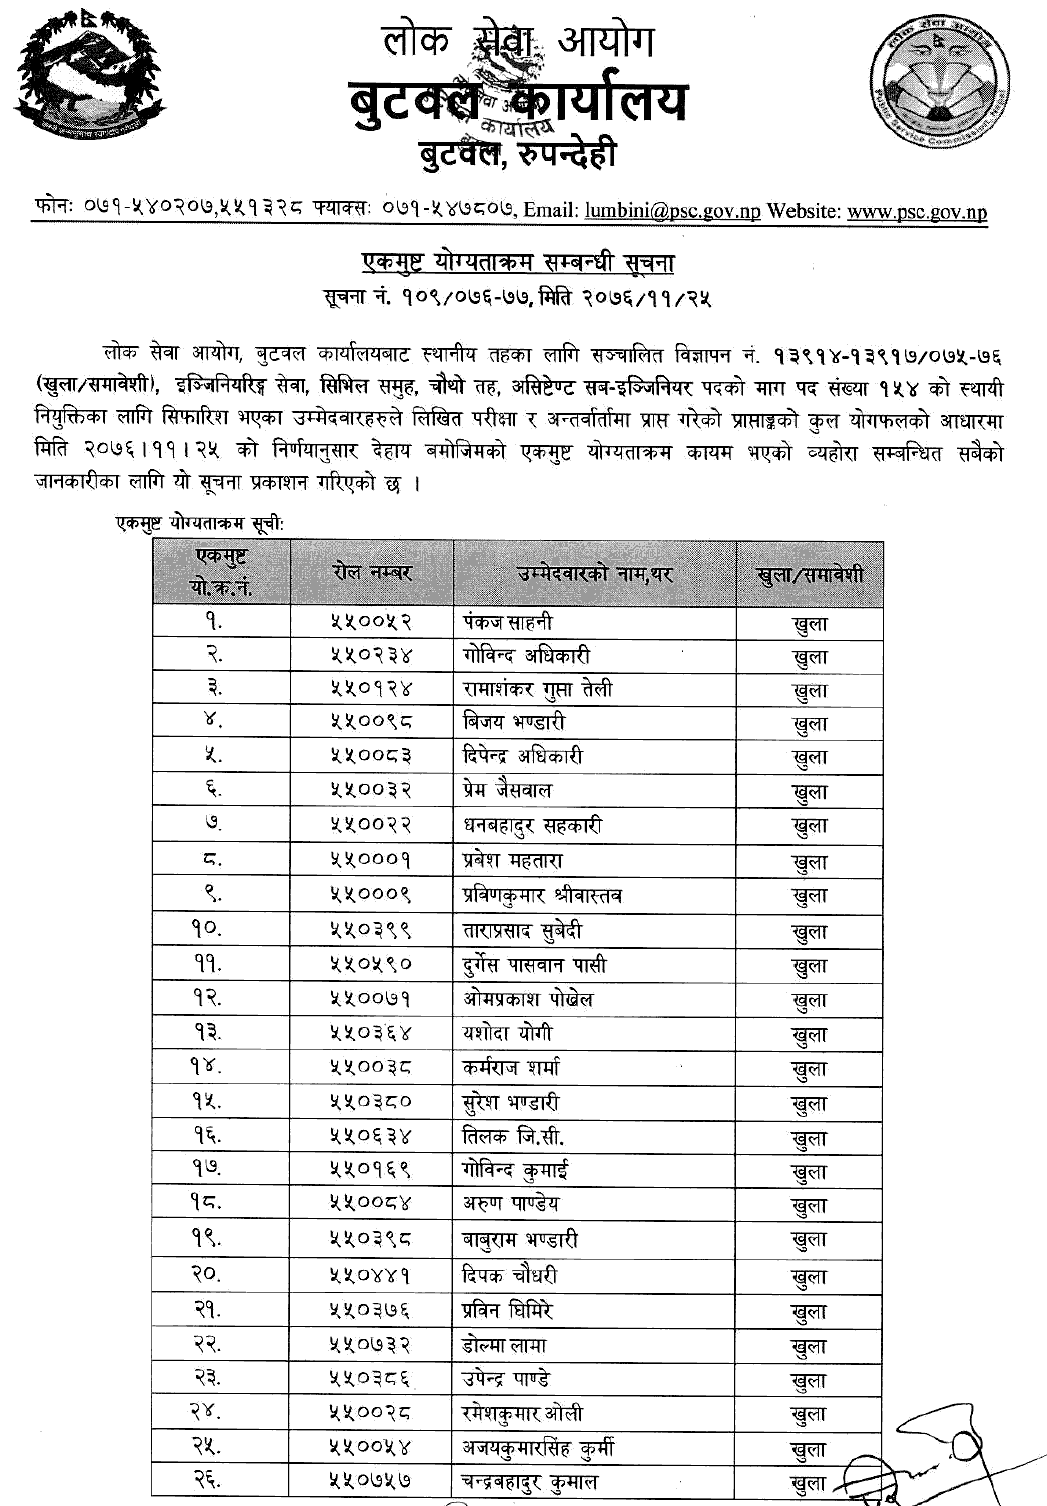 Lok Sewa Aayog Butwal Local Level 4th Assistant Sub Overseer Final Result and Sifaris